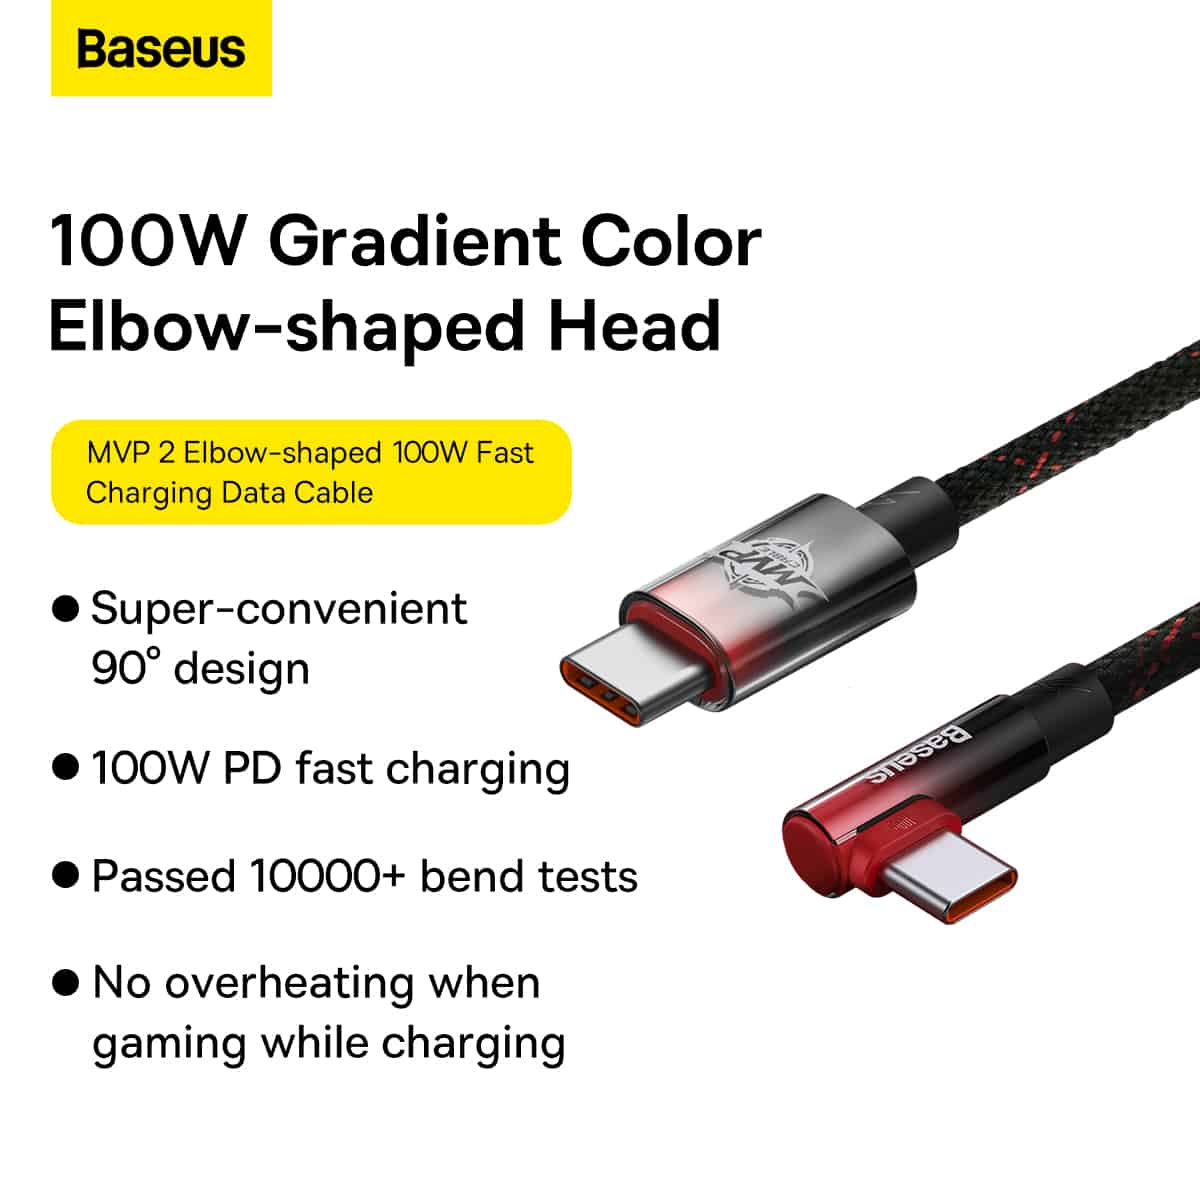 Baseus MVP 2 Elbow Shaped Fast Charging Data Cable Type C to Type C 100W 2